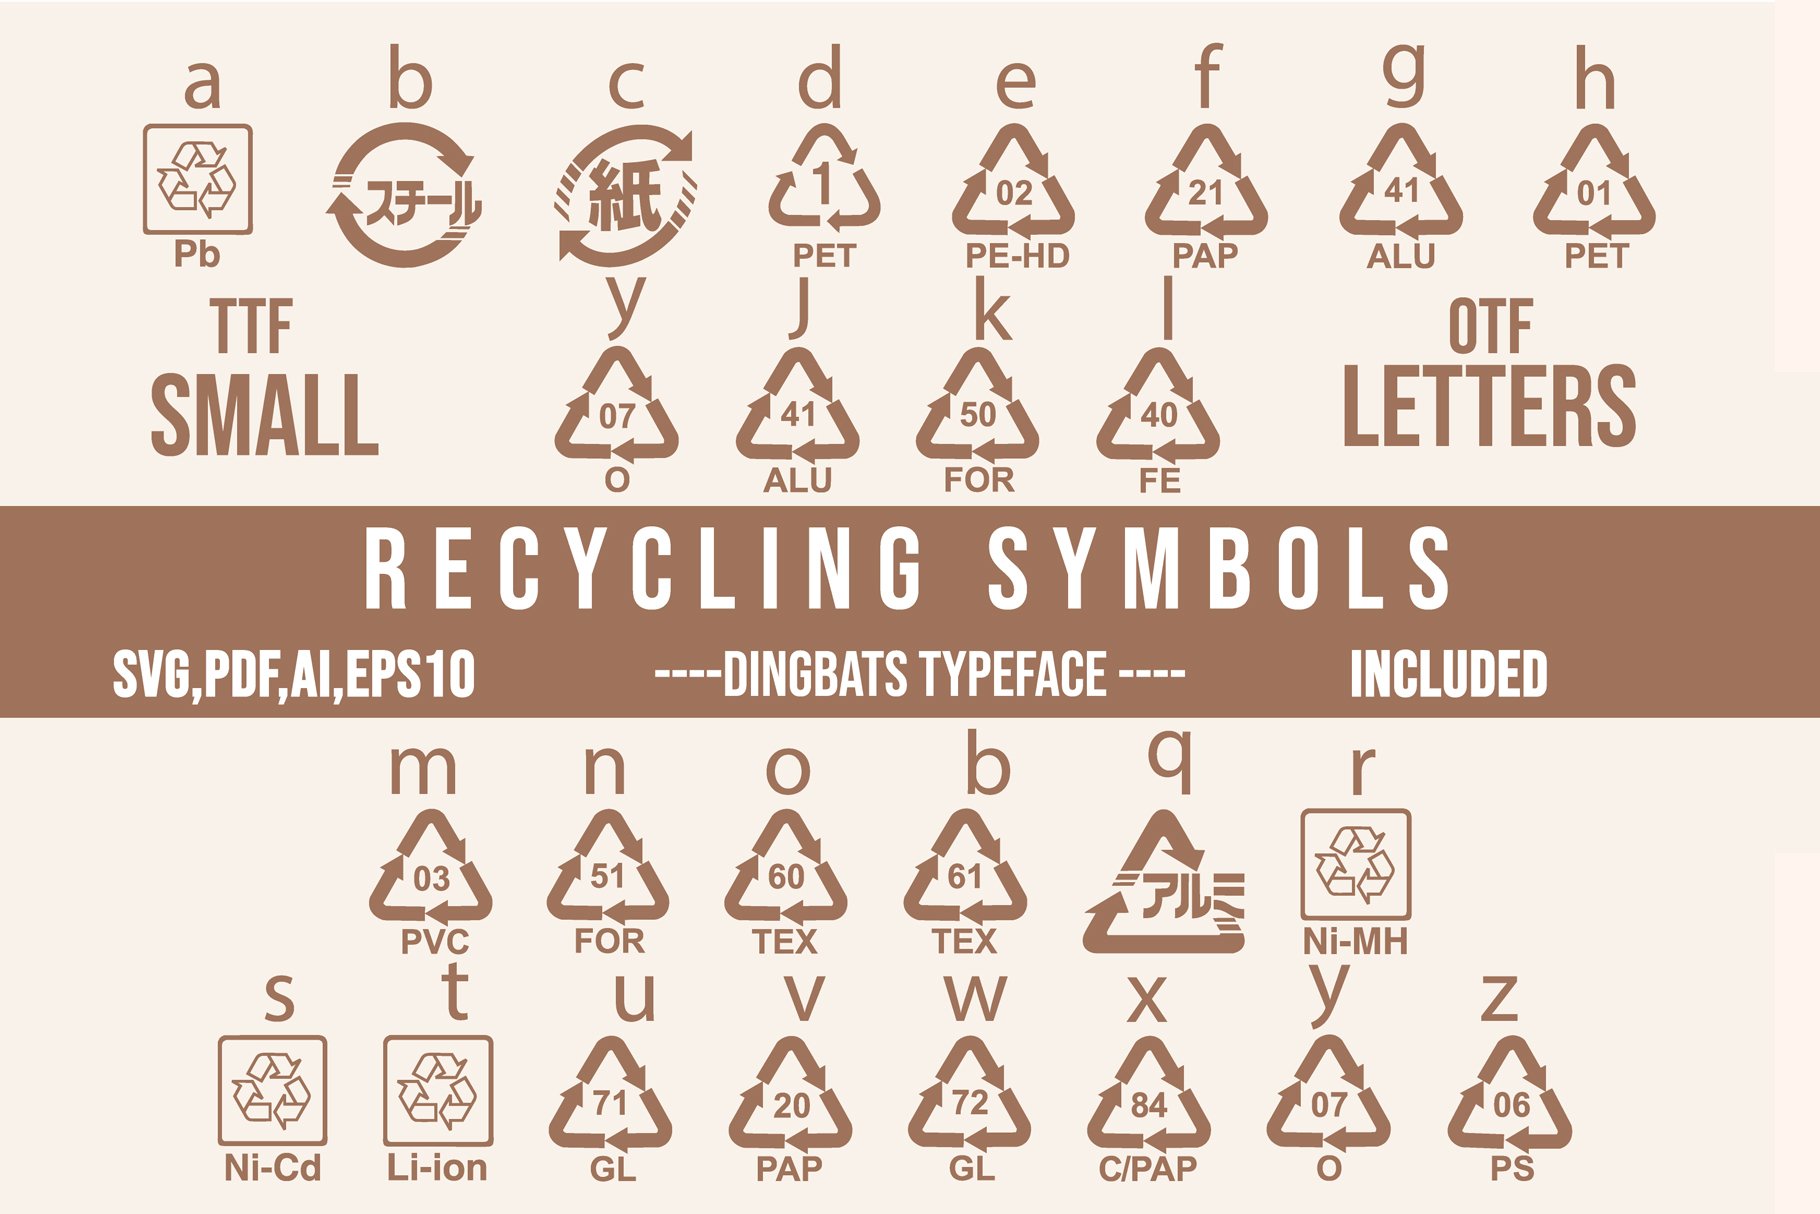 Packaging Recycling Symbols Dingbats cover image.